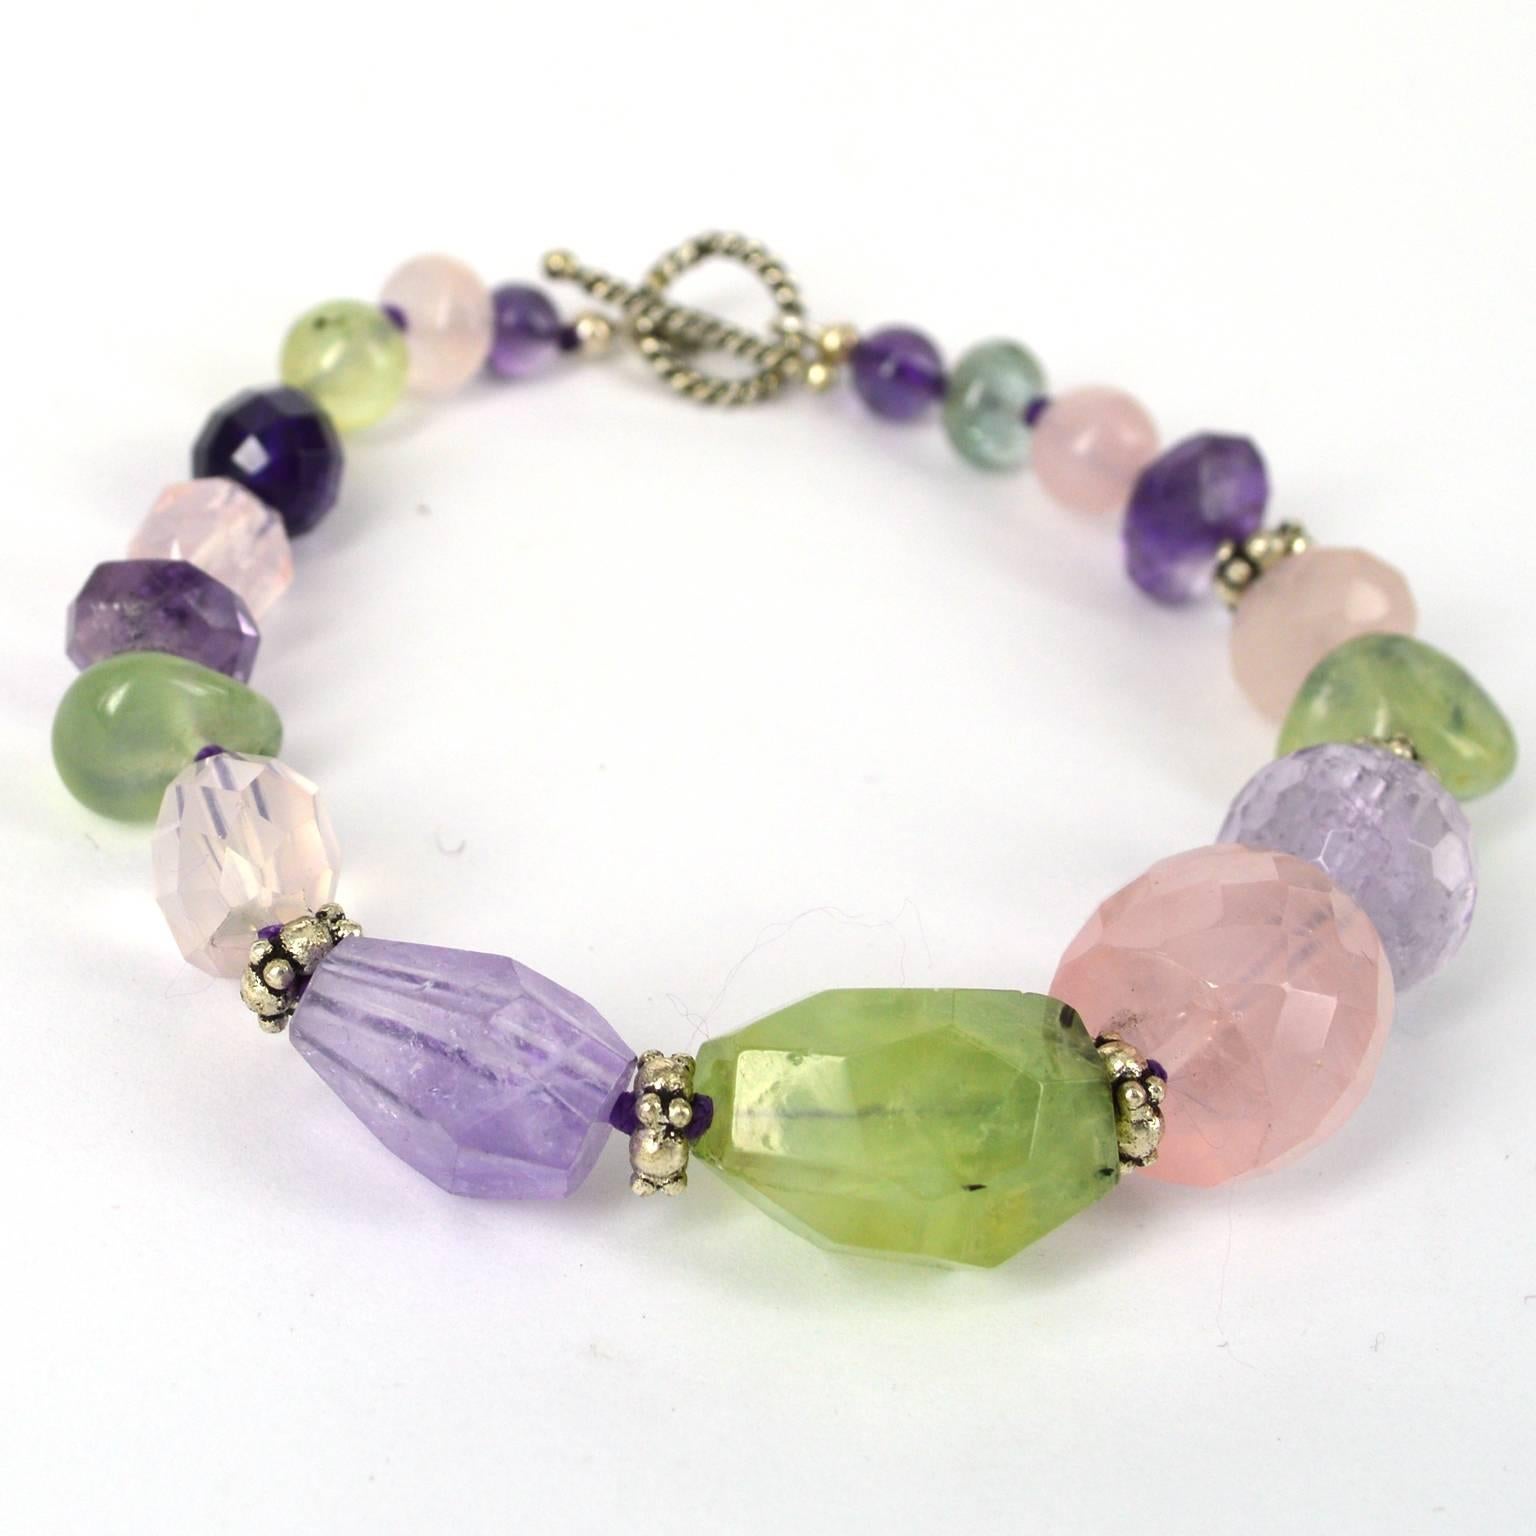 Chunky Bracelet with spaced with Sterling silver beads and knotted on dark purple thread the largest Rose quartz bead is 16x12mm and the finished length is 22.5cm. 
Earrings are Sterling silver 13mm polished Prehnite bead with a 10x7mm faceted Rose